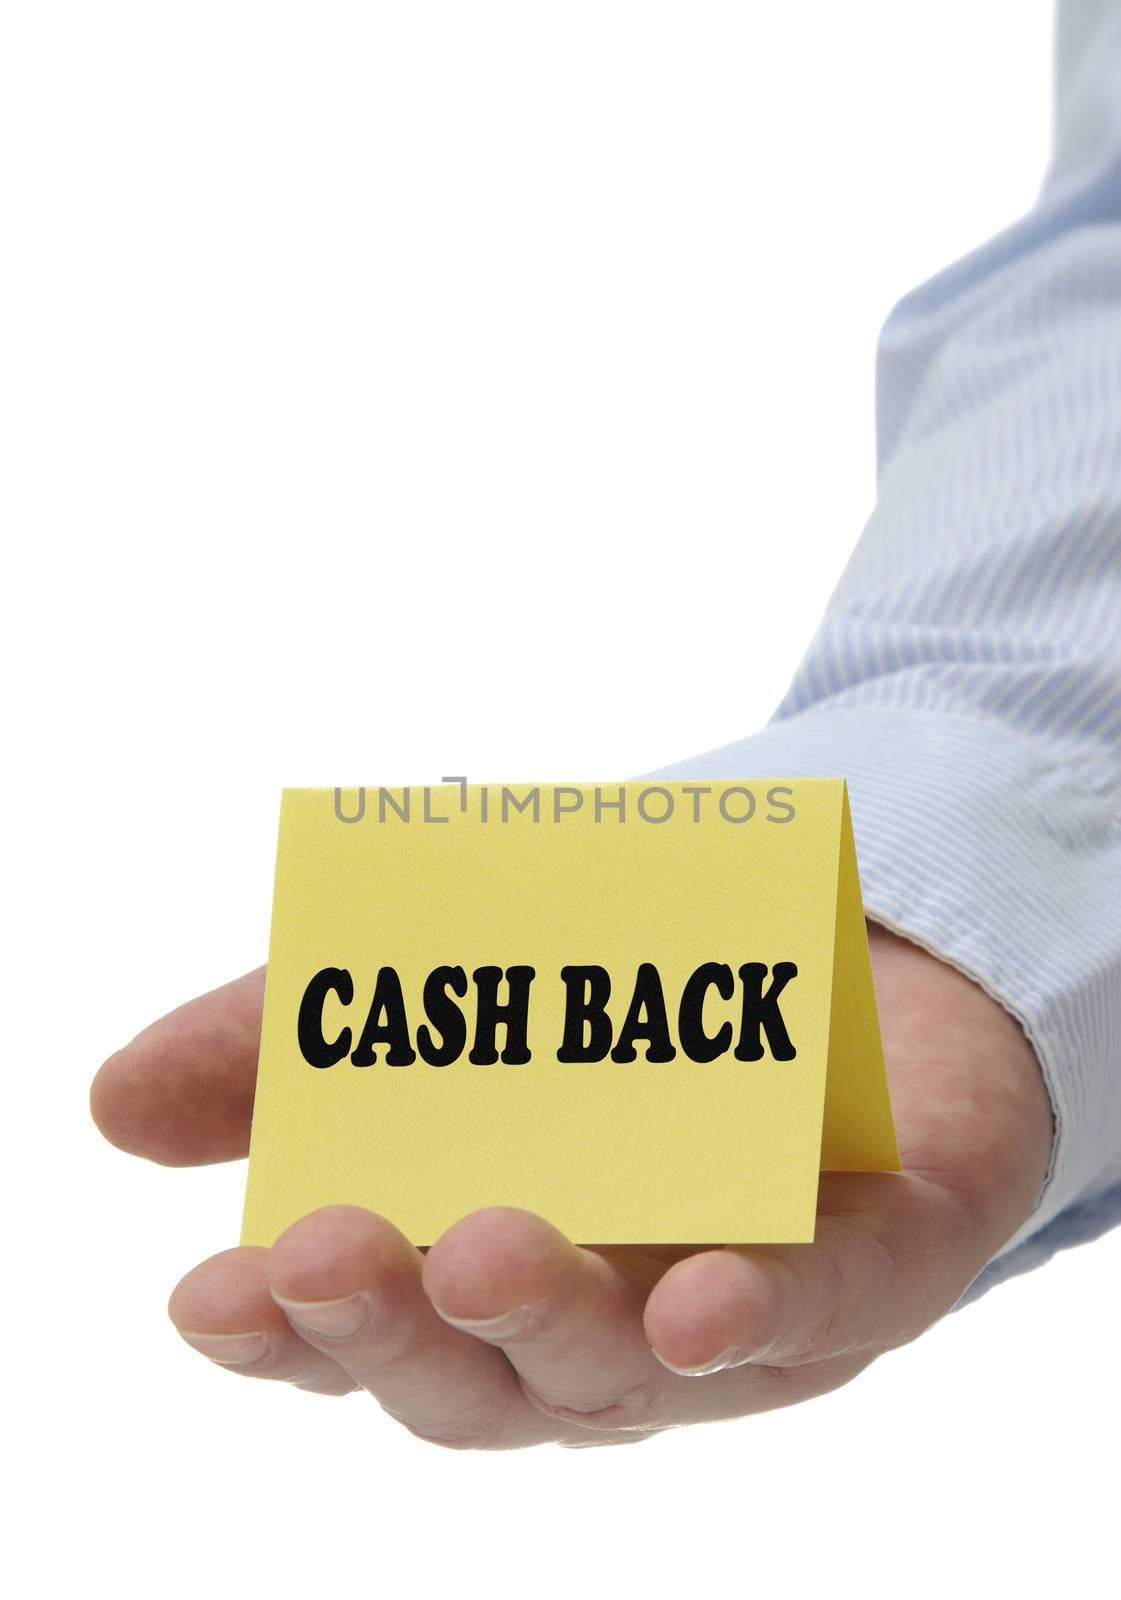 Cash Back - Sign Series  by payphoto